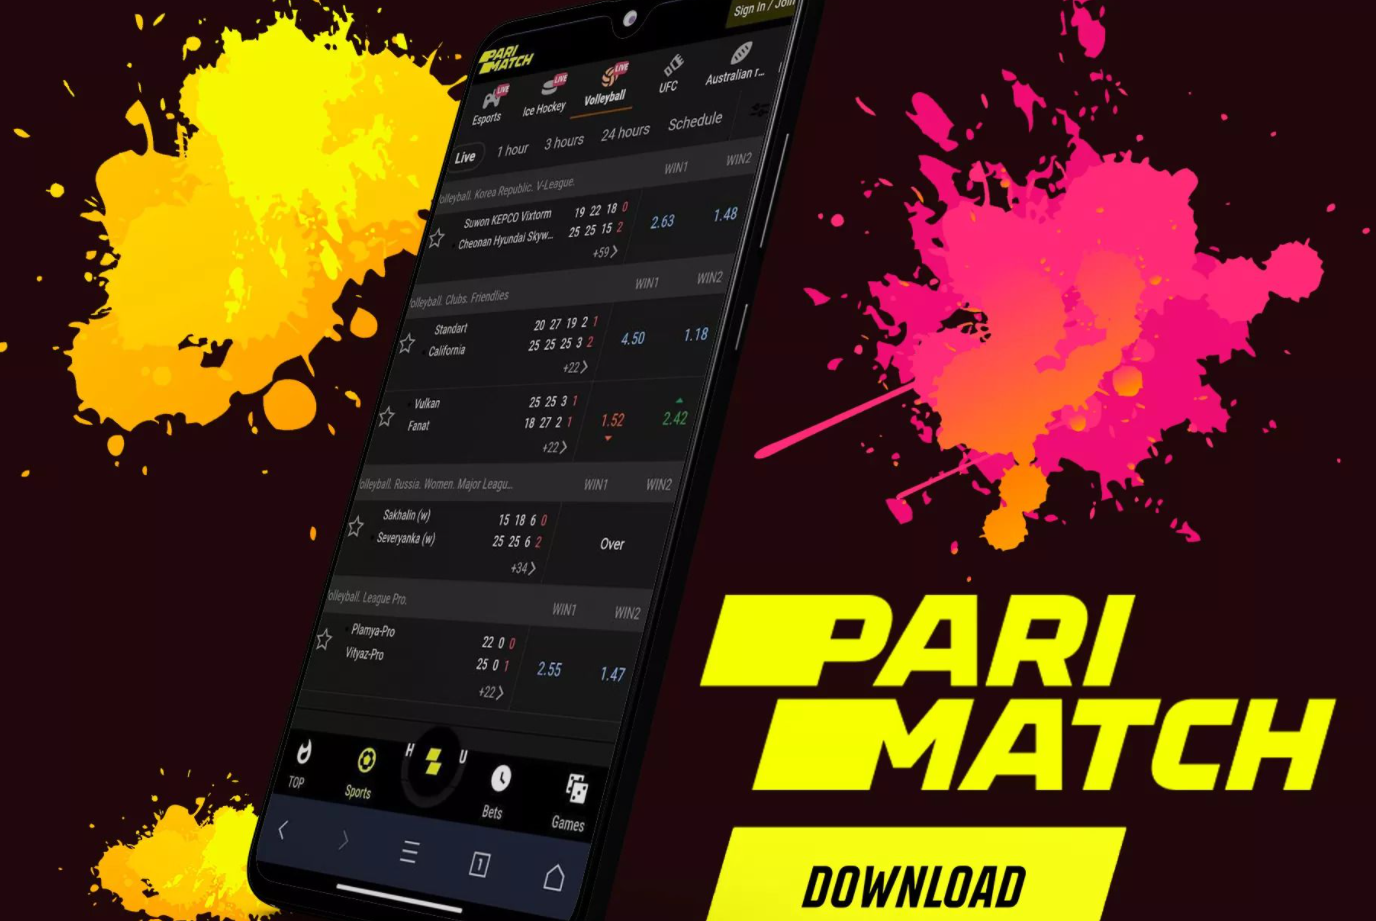 Parimatch iOS – features of app download for sports betting